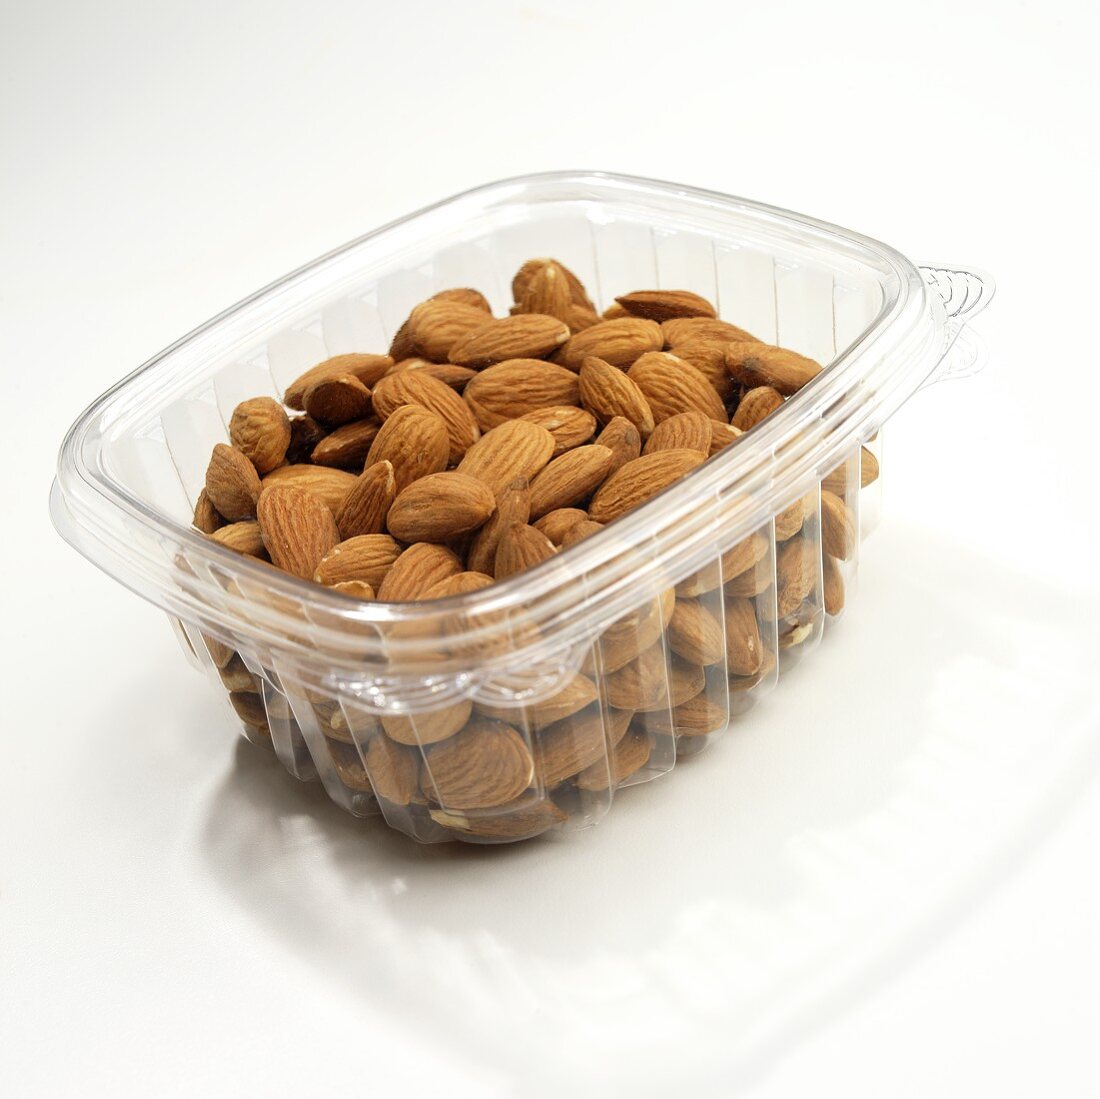 Whole Almonds in Plastic Store Container